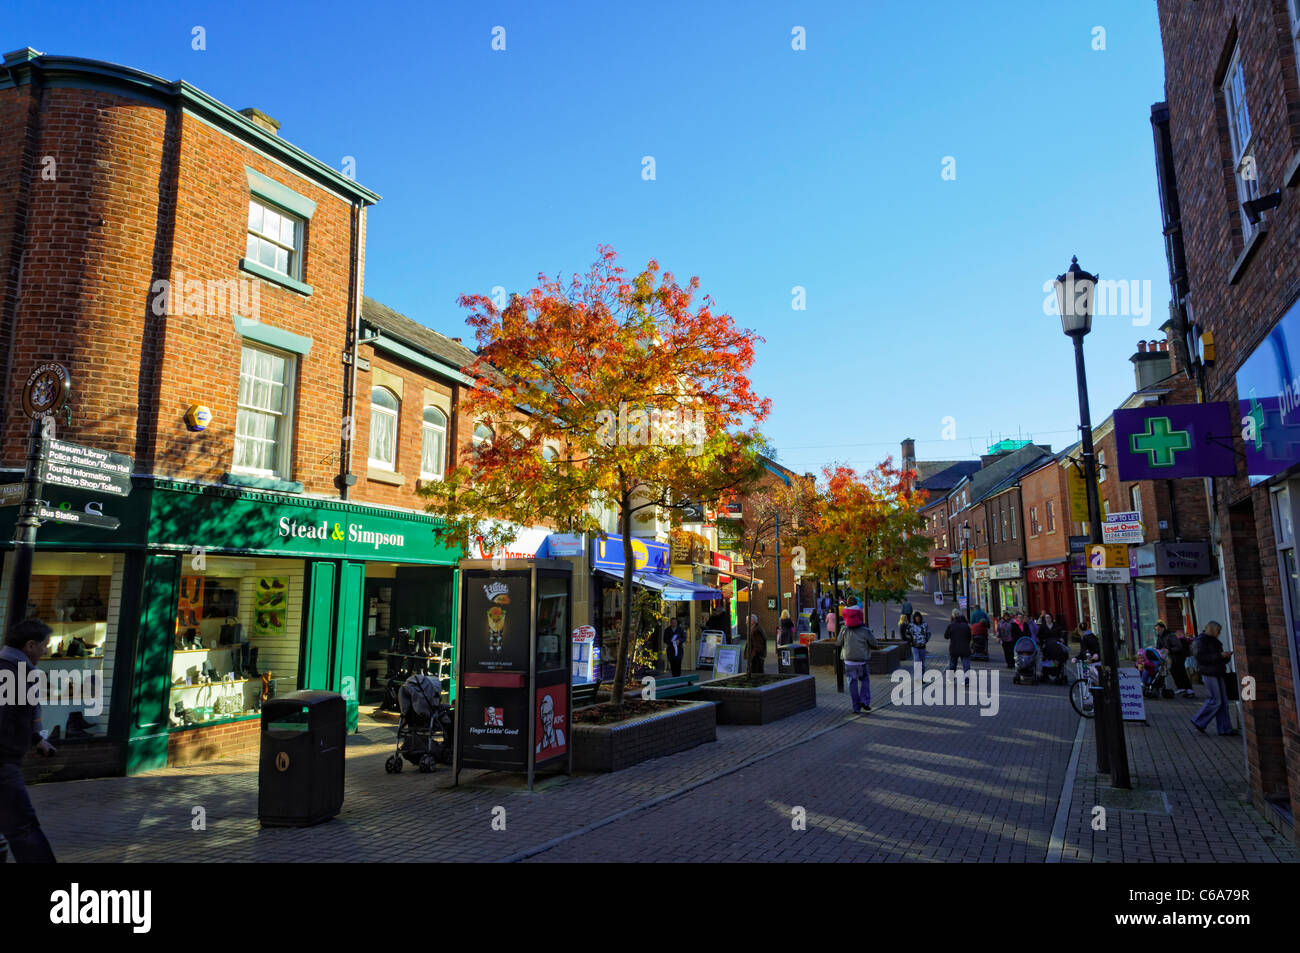 Pedestrianised main street of a typical small English town, with typical shops. Everyday life in small town UK. Stock Photo